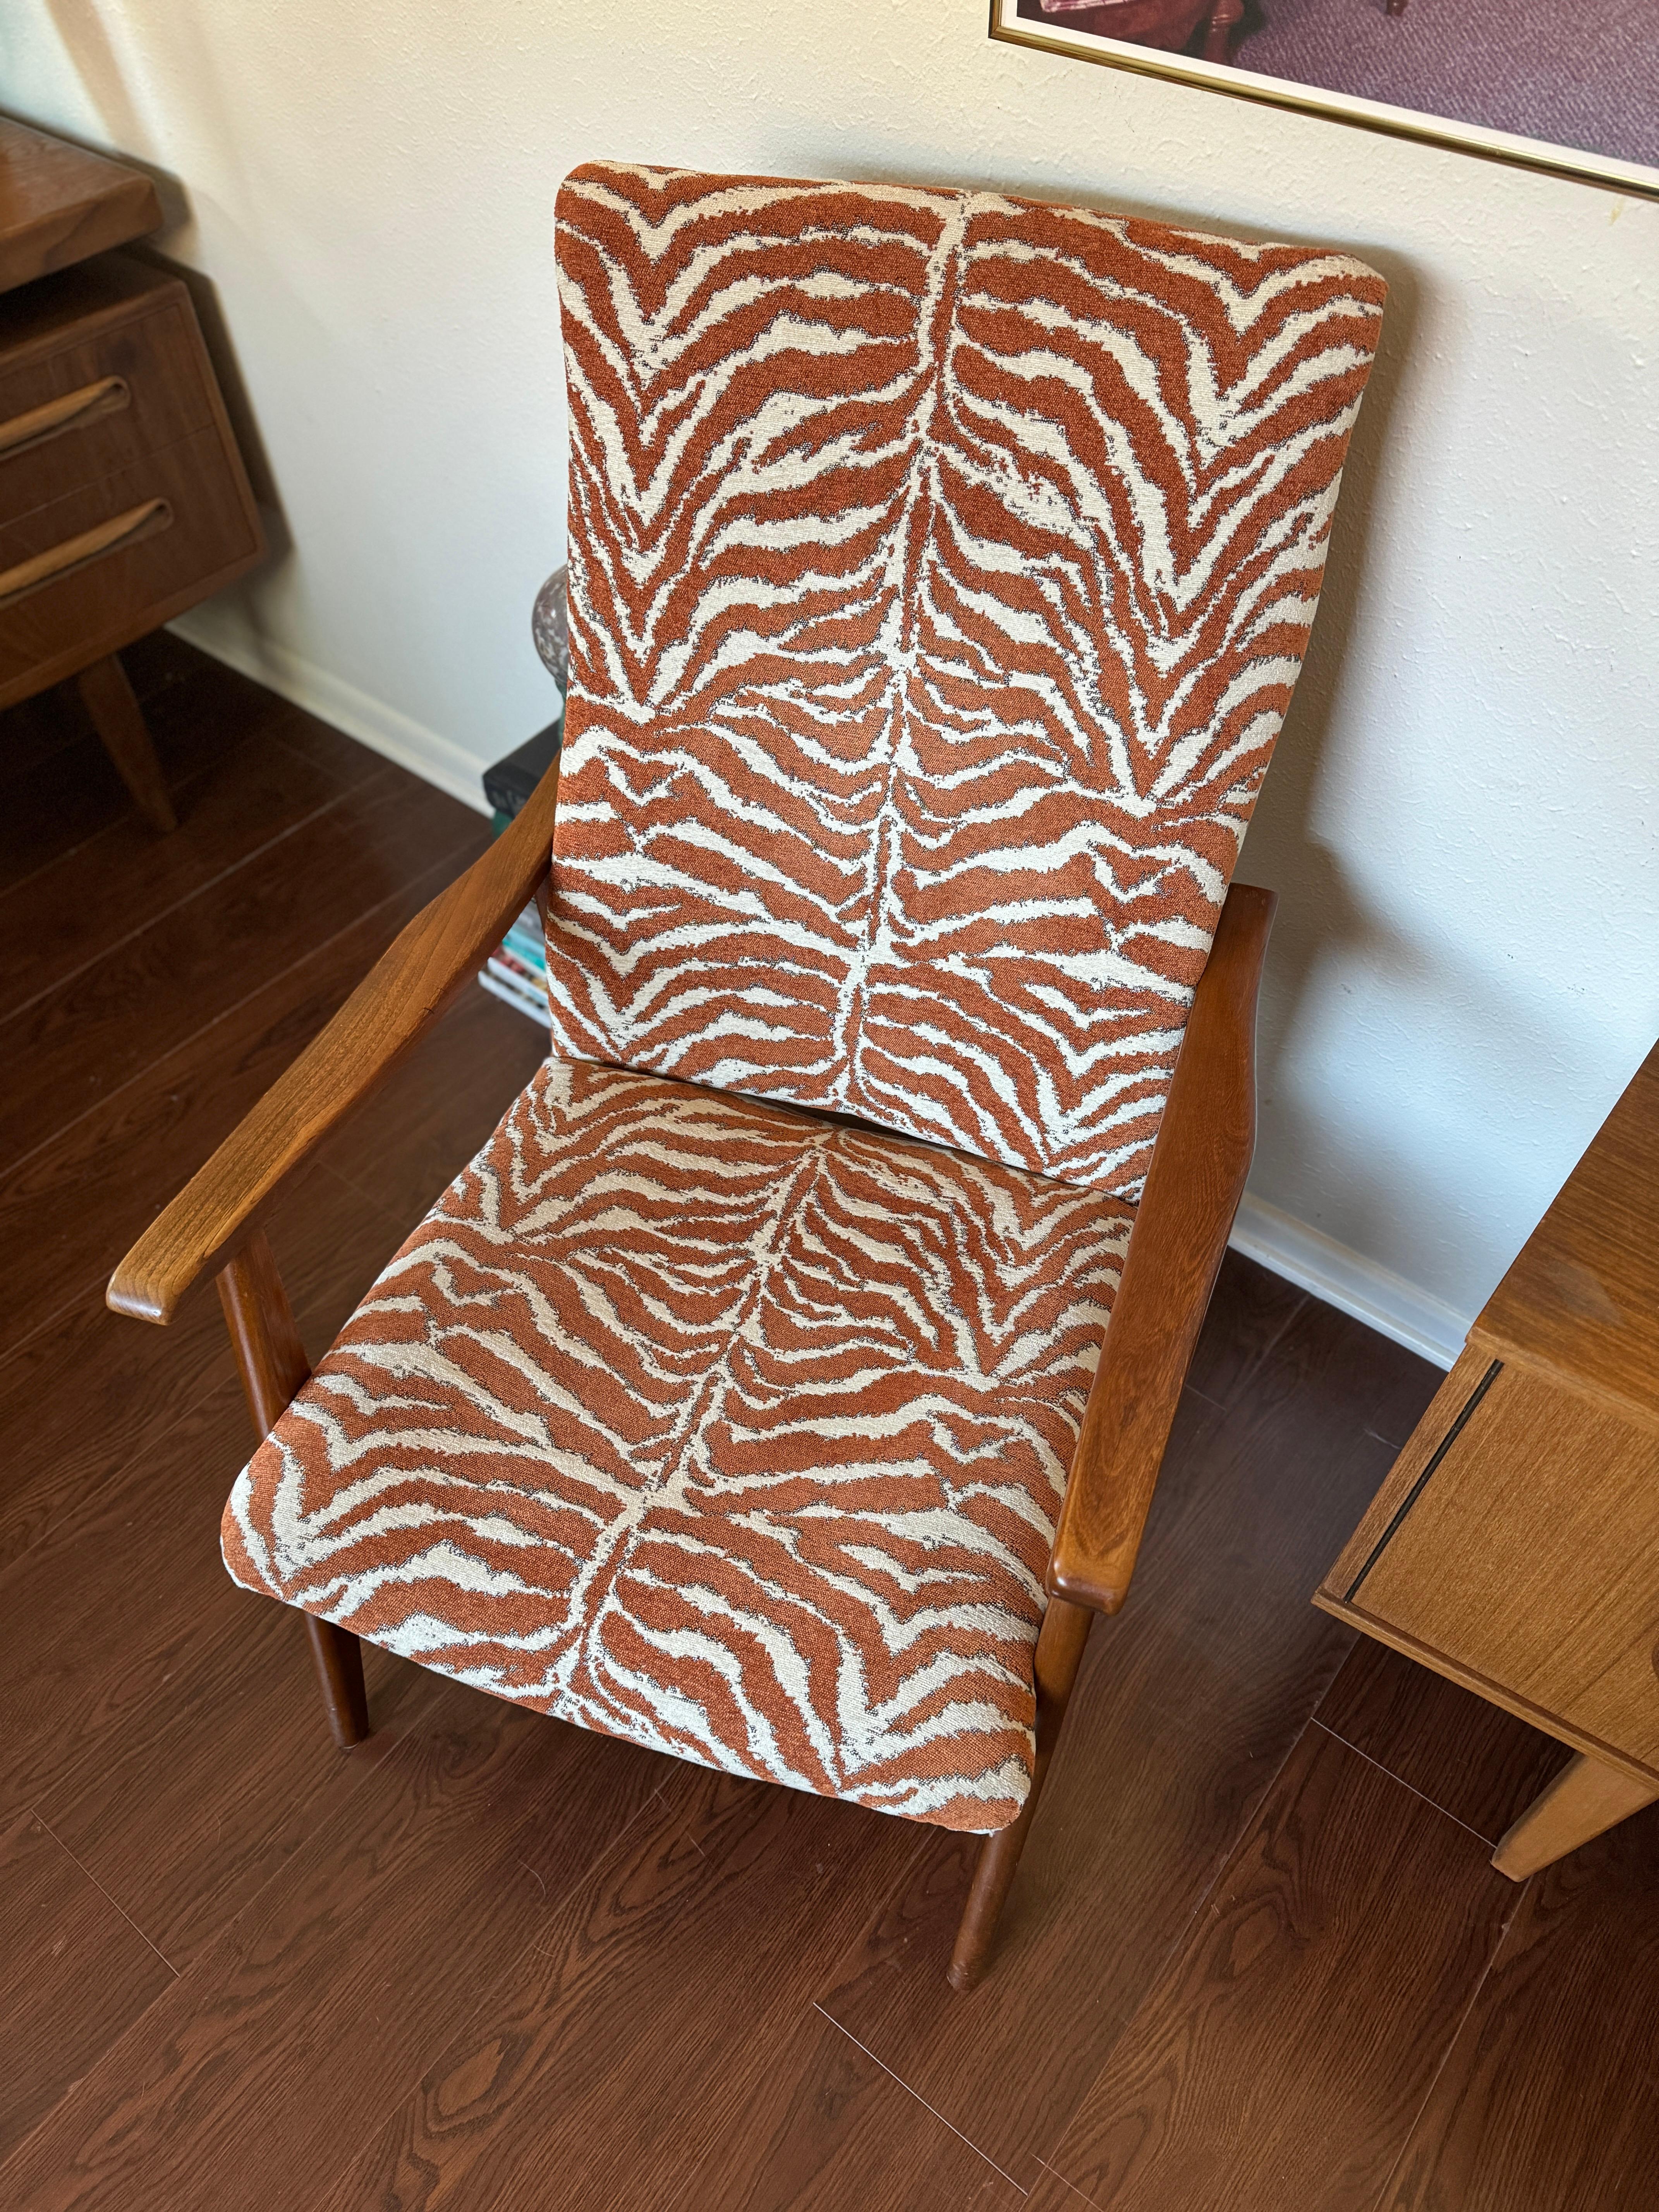 Amazing mid century modern Scandinavian style high back lounge chair, circa 1960s. Solid teak frame with a zebra like burnt orange and cream upholstery that’s in good condition. There’s a beautiful patina to the teak. Maker is unknown. 

22” W × 24”